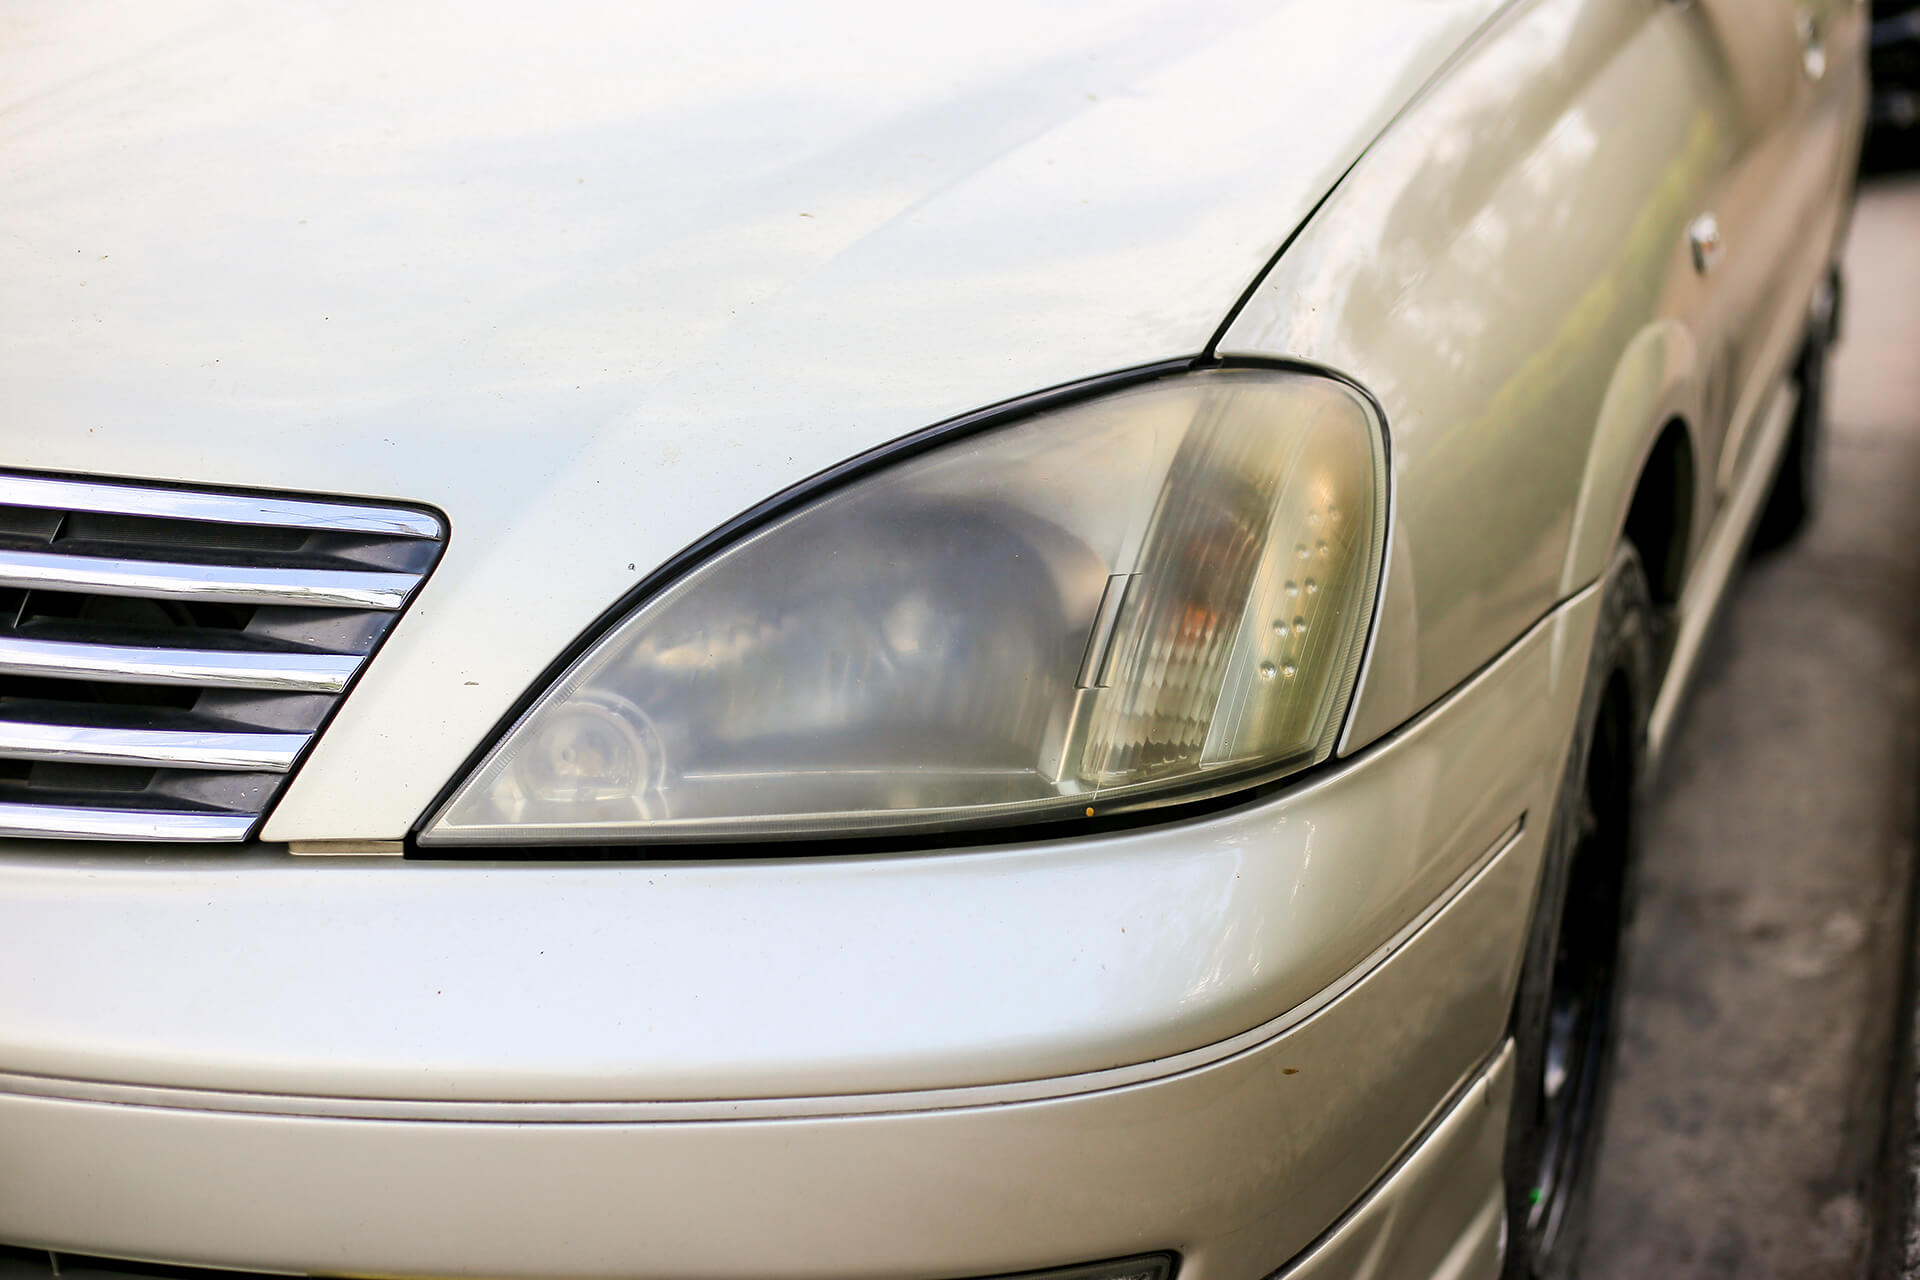 How to Repair a Cracked Headlight Lens